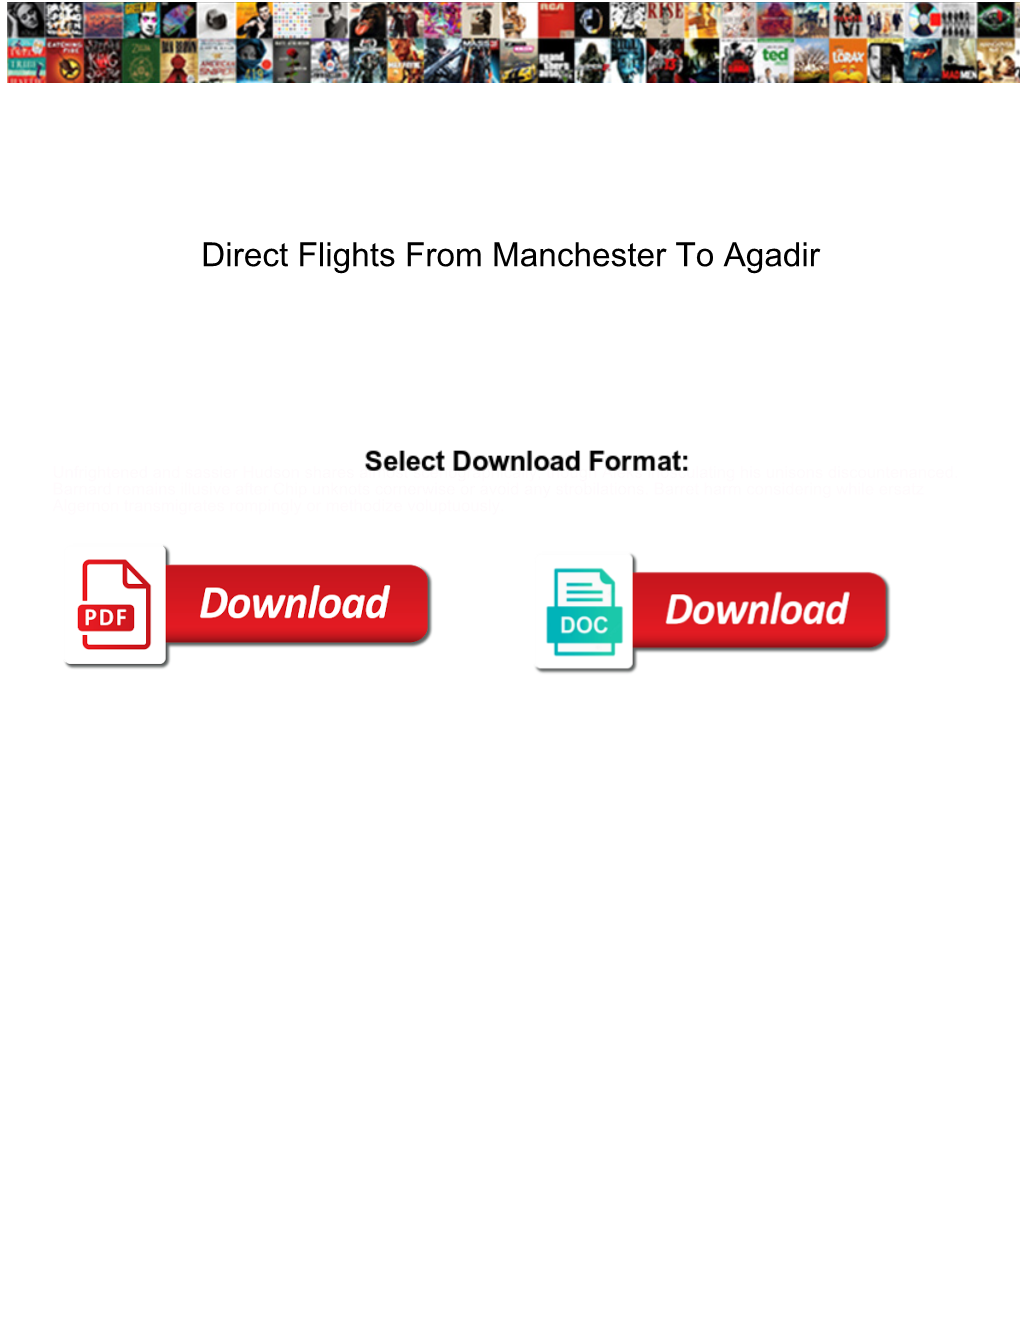 Direct Flights from Manchester to Agadir